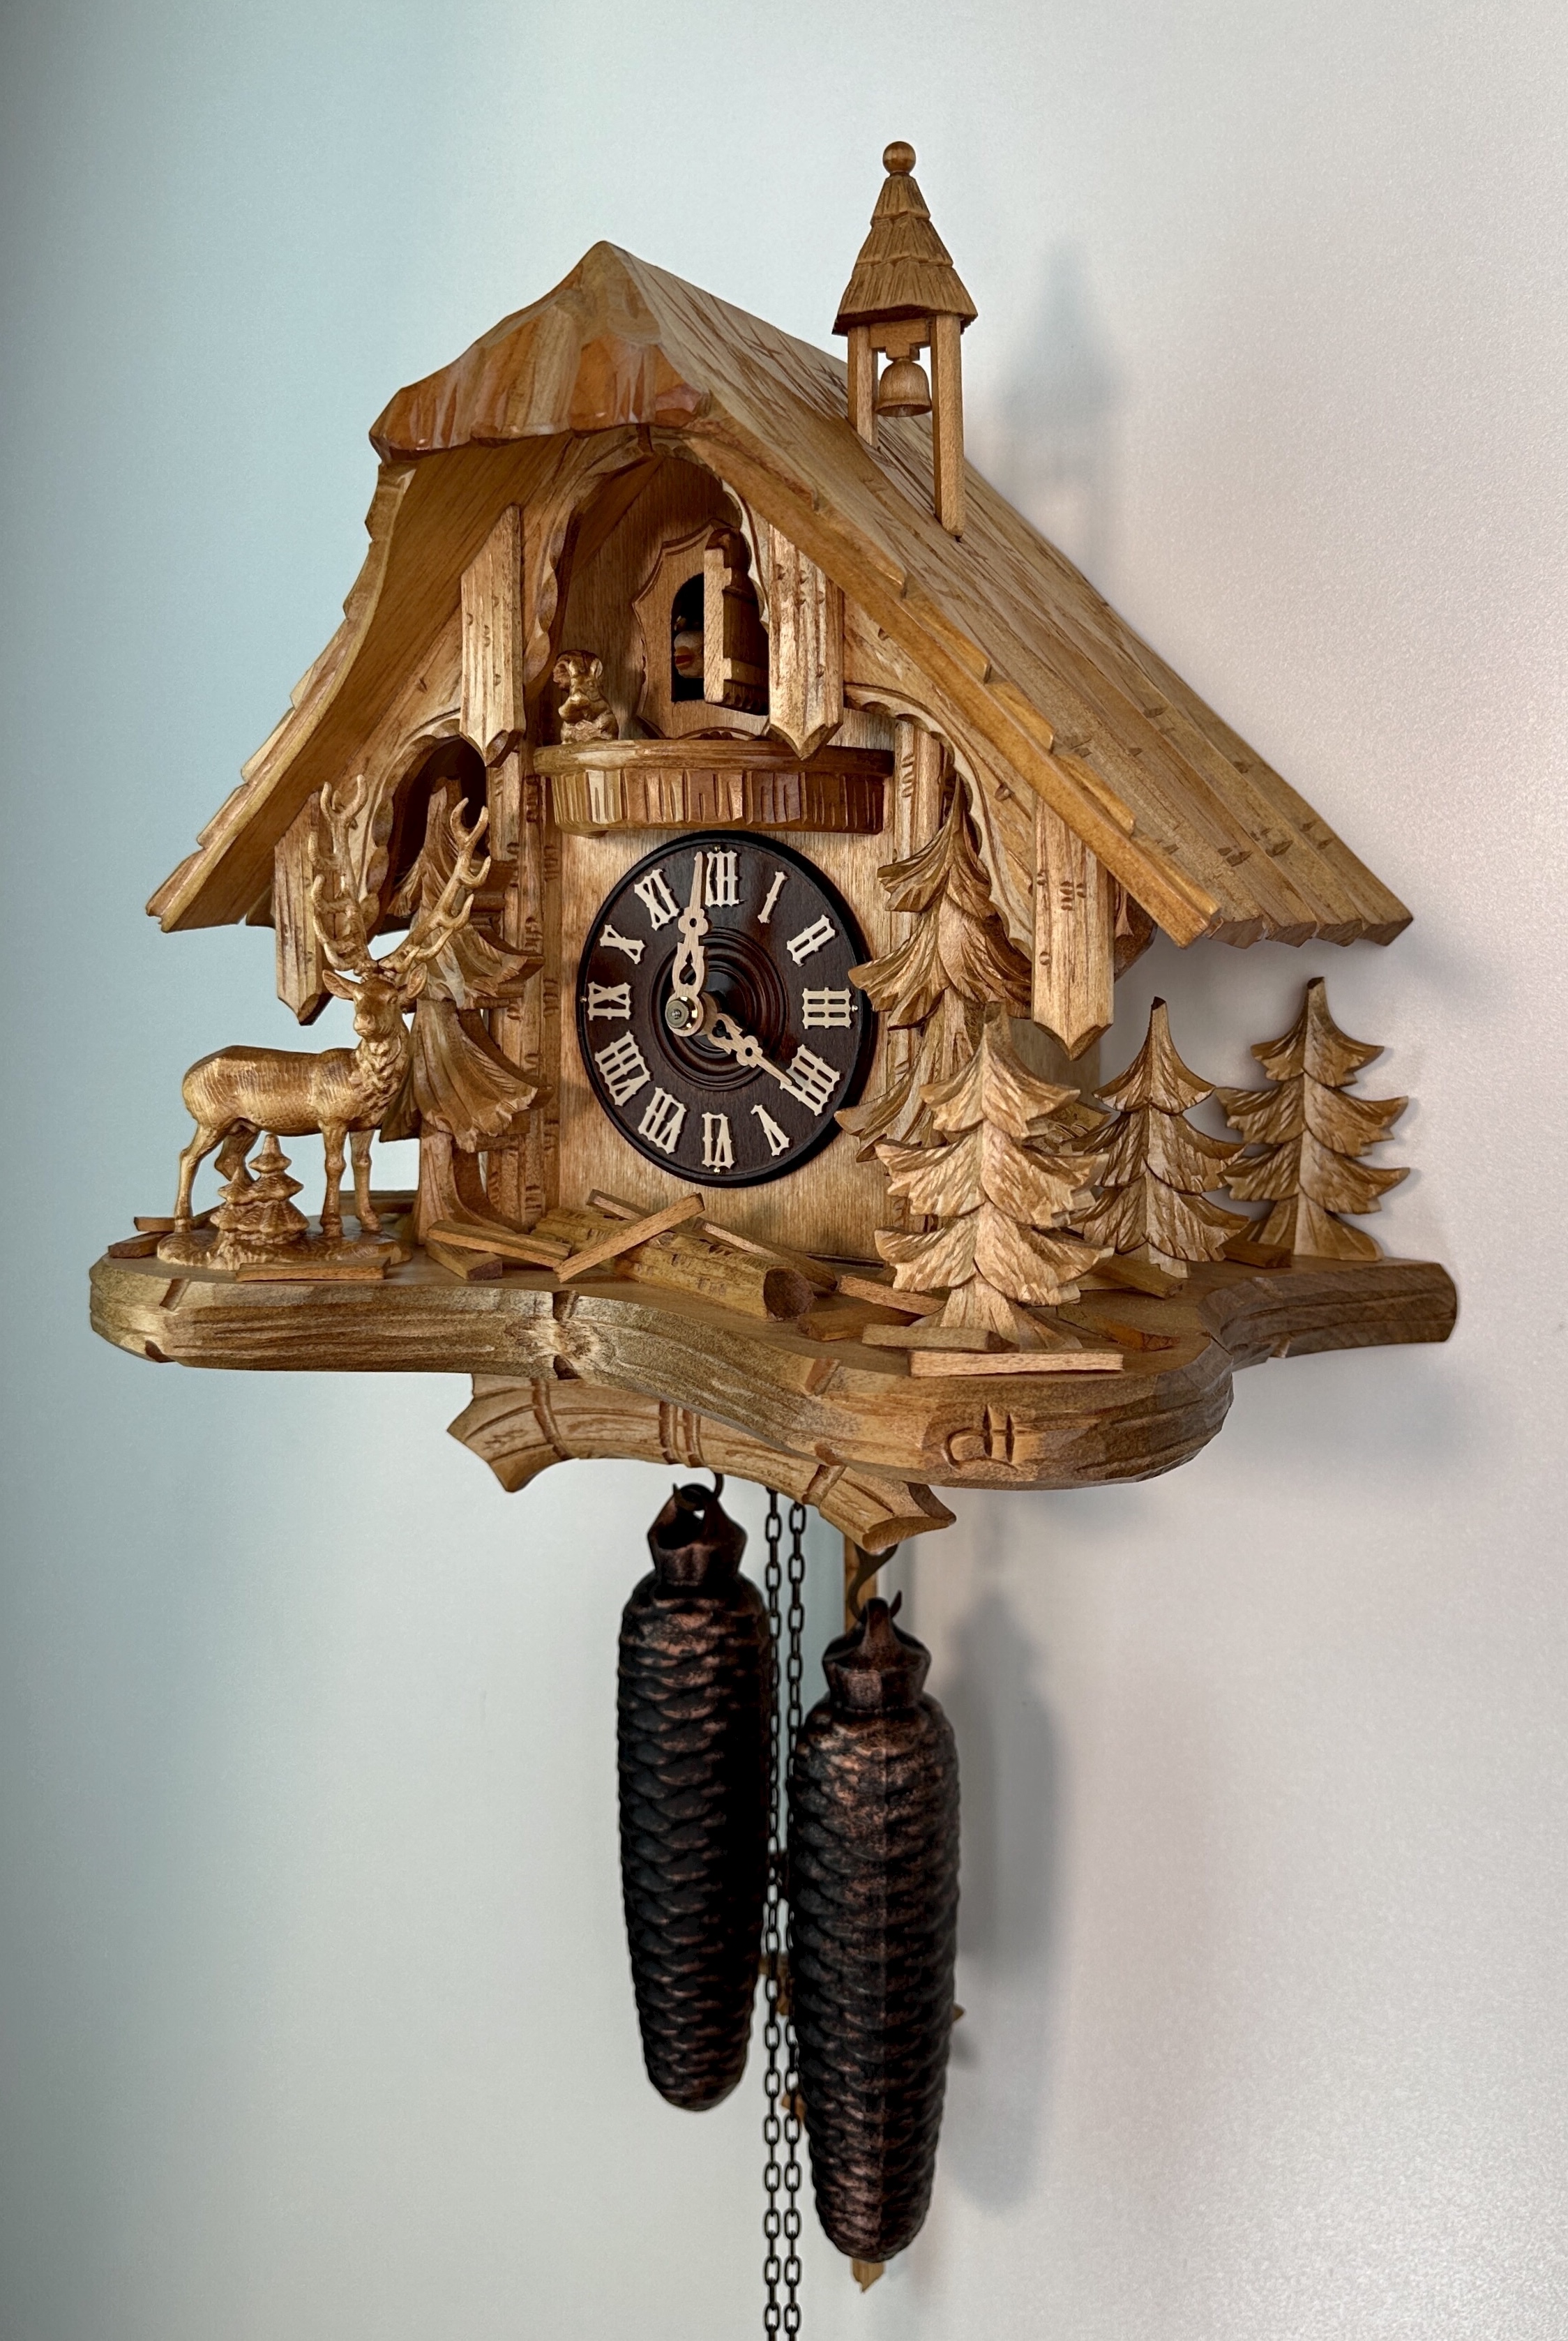 8 Days Cuckoo Clock Black Forest House with deer and squirrel